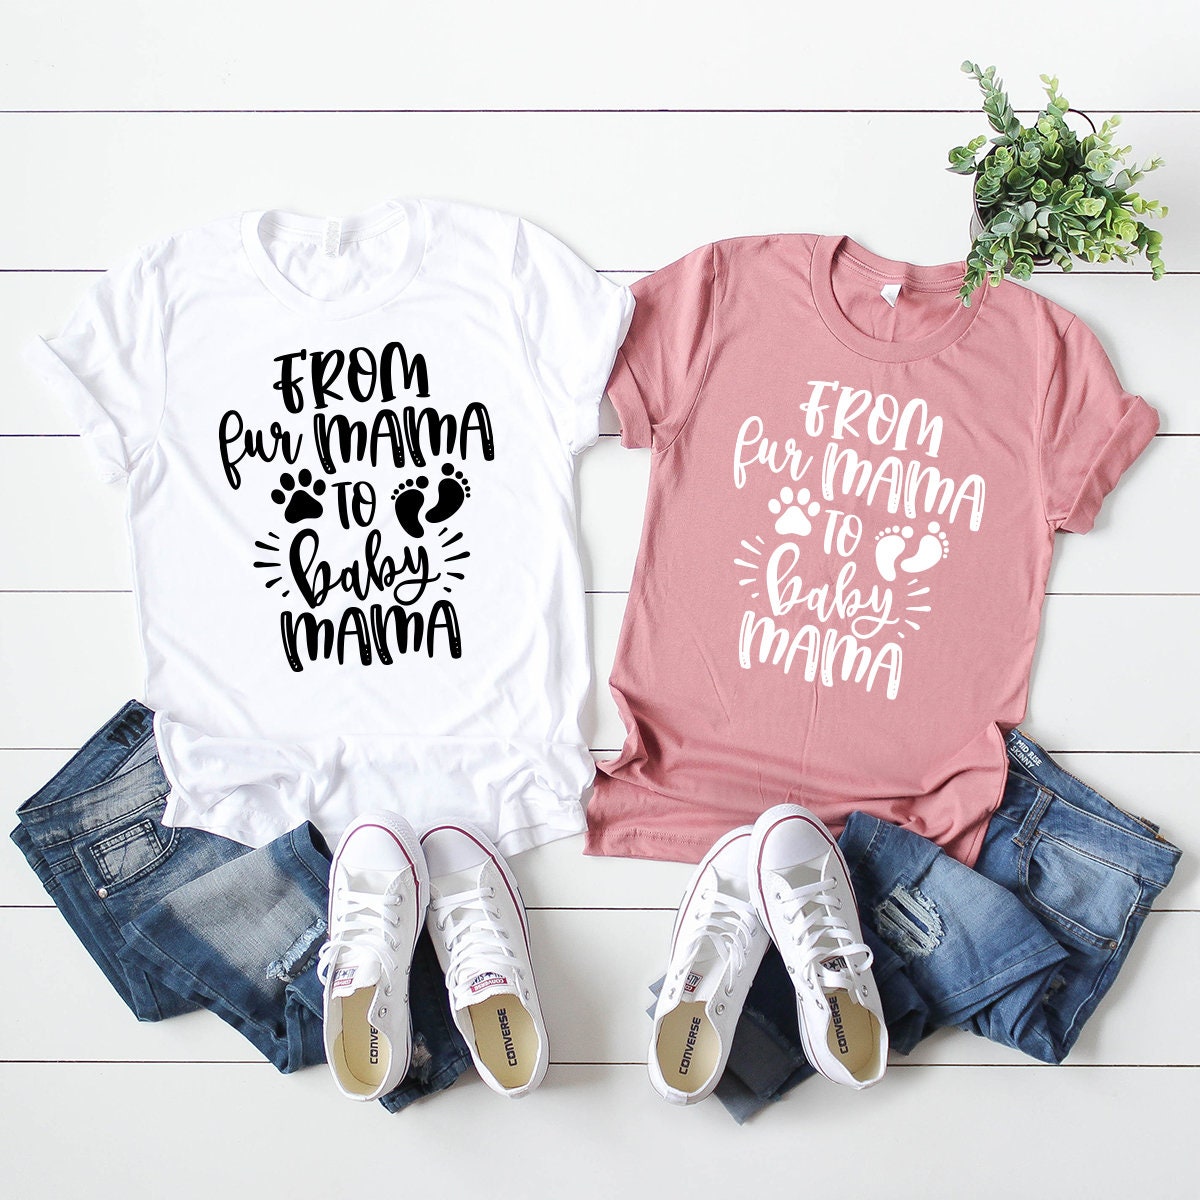 Pregnancy Announcement Shirt, Im Pregnant Shirt, First Mothers Day, Funny Pregnant Shirt, Baby Shower Tshirt, New Mom Gift, Maternity Tee